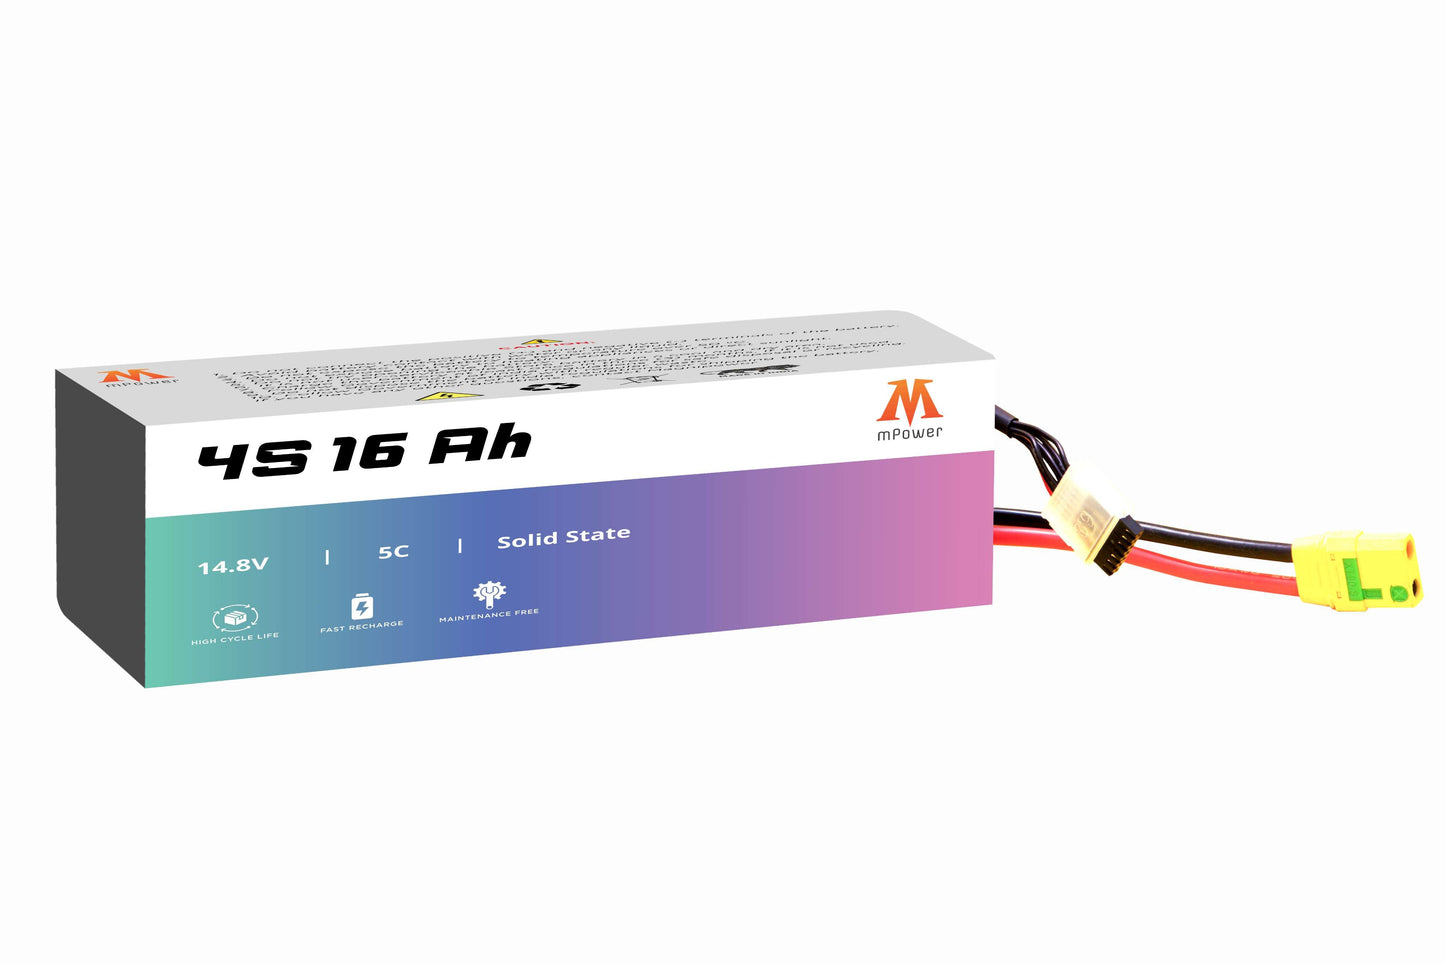 mPower 4S 16Ah Solid States Battery for Surveillance Drones